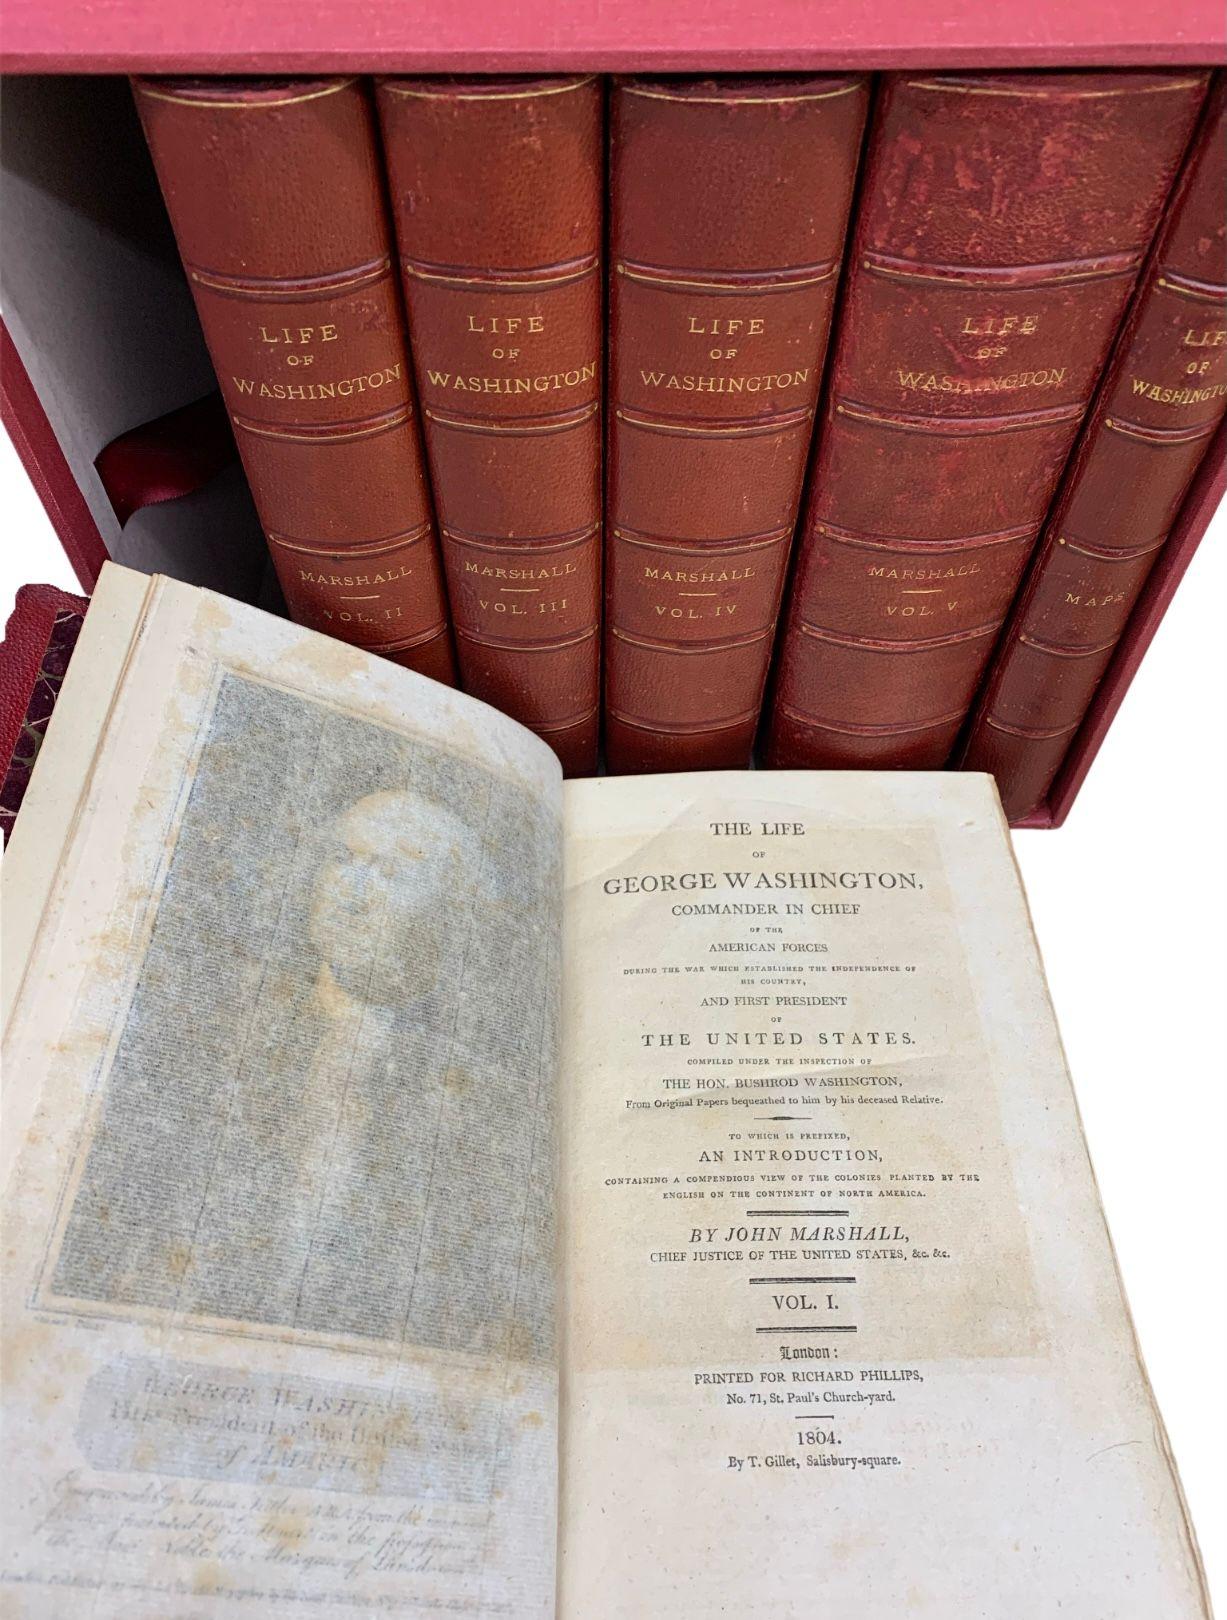 Early 19th Century Life of George Washington by John Marshall, 6-Vol with Maps, 1st Ed., 1804-1807